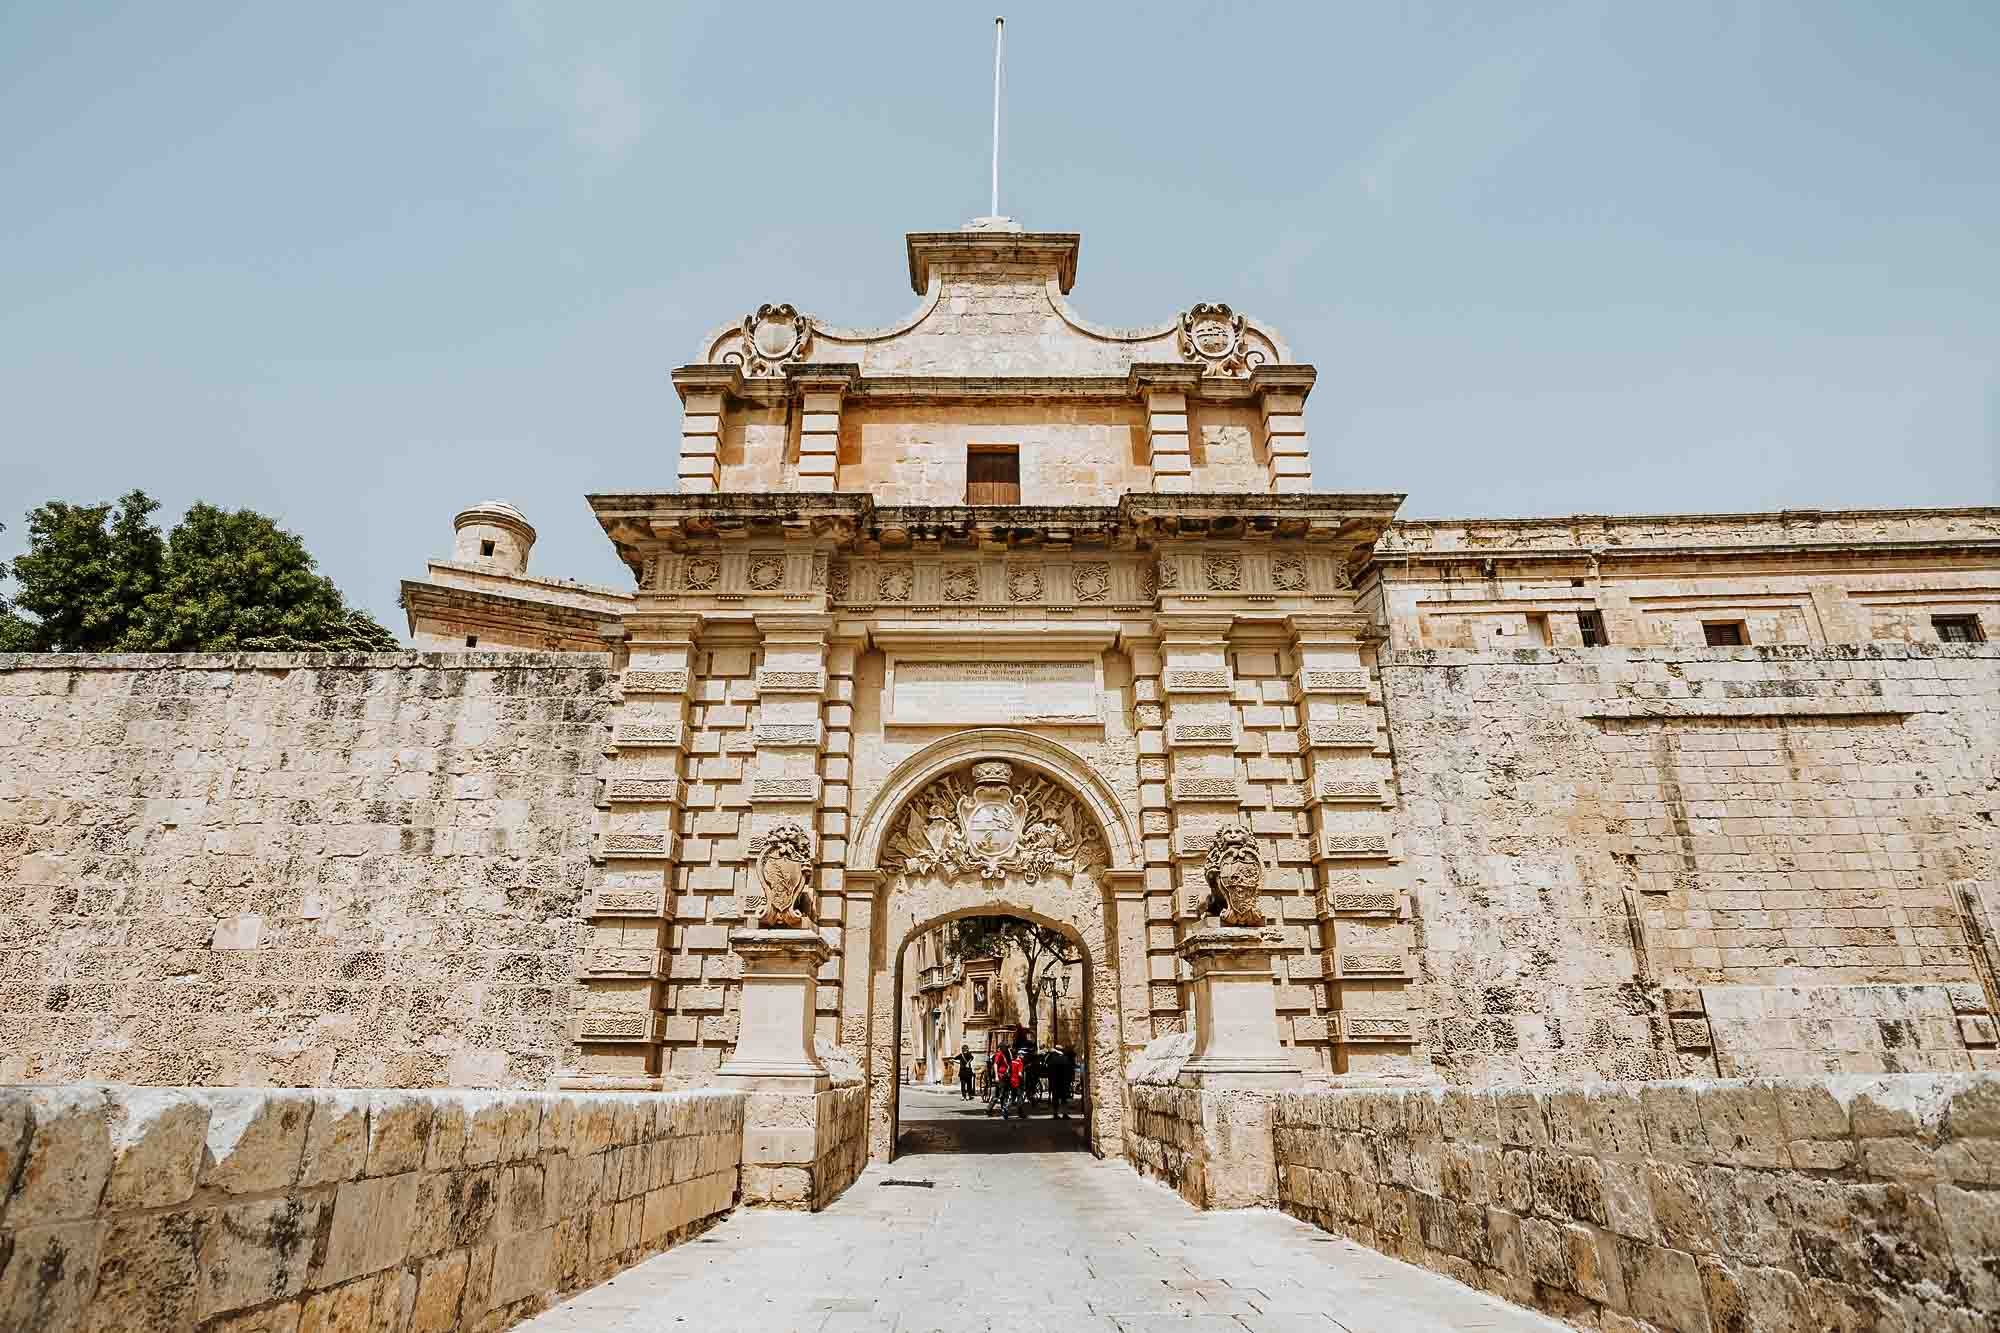 The main gate of the Mdina from Valletta to Mdina